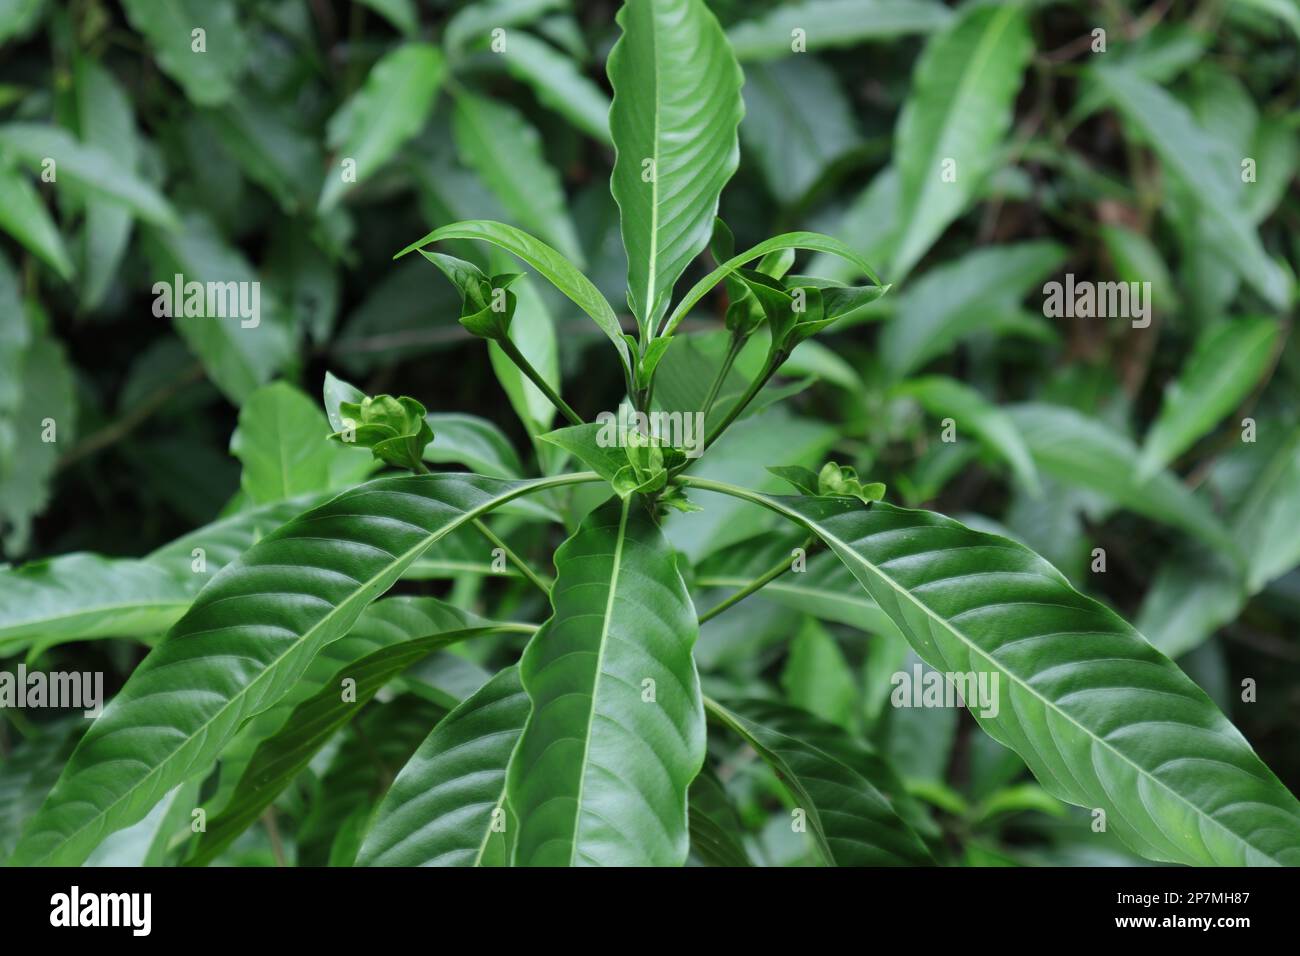 The flower buds of a Malabar nut plant (Justicia Adhatoda), This is the pre stage of flowering this plant Stock Photo